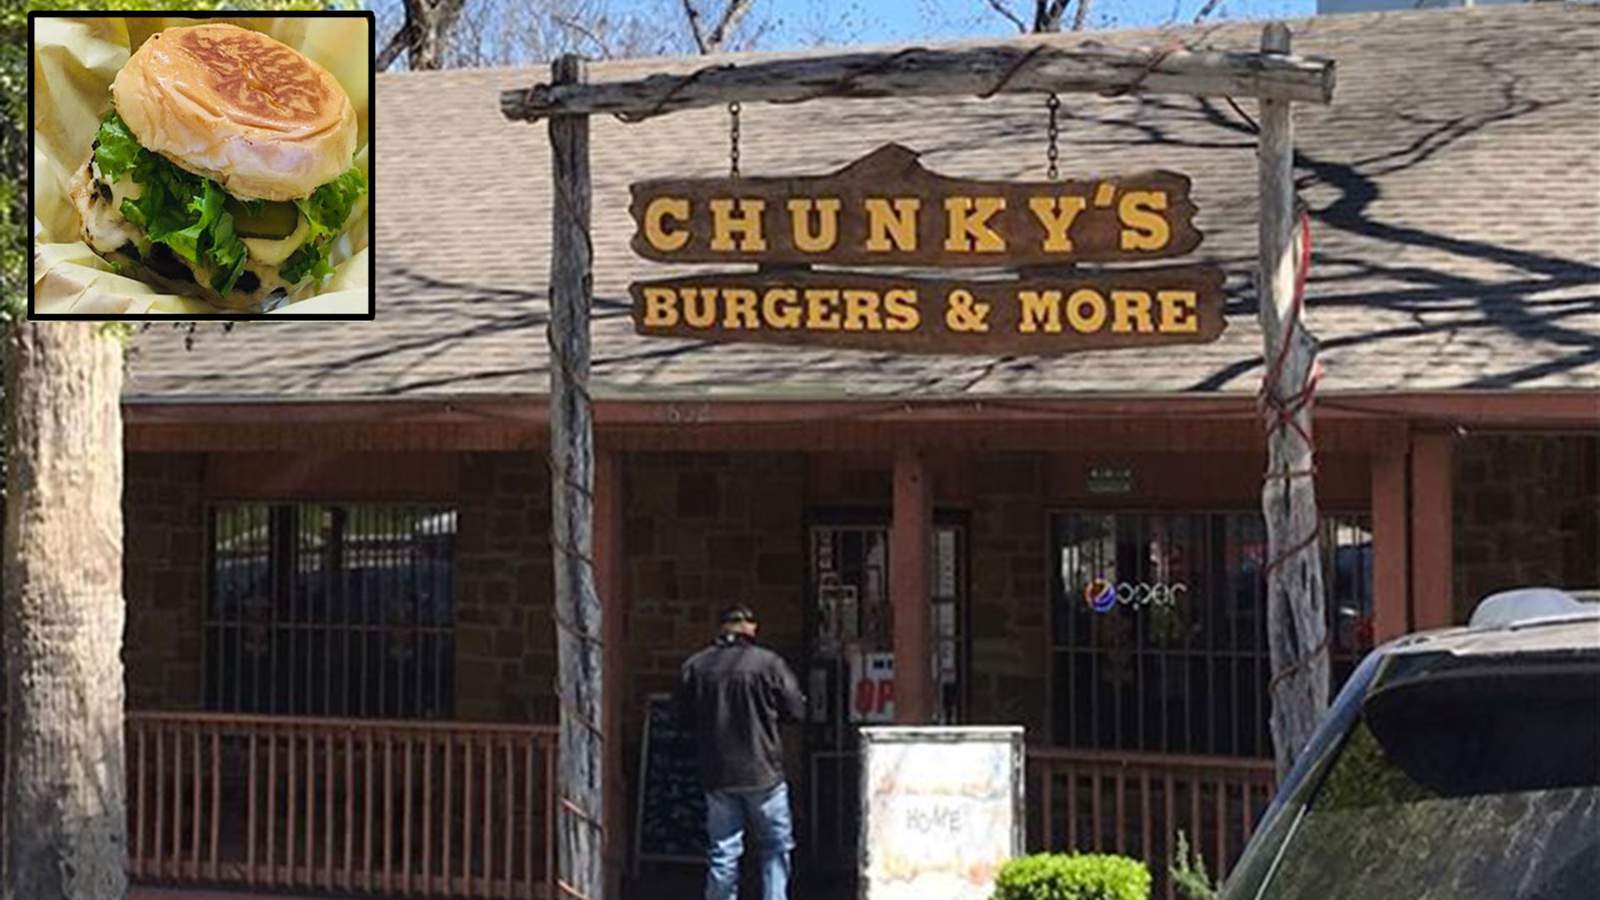 Famous San Antonio restaurant offering free burger meal for those in need